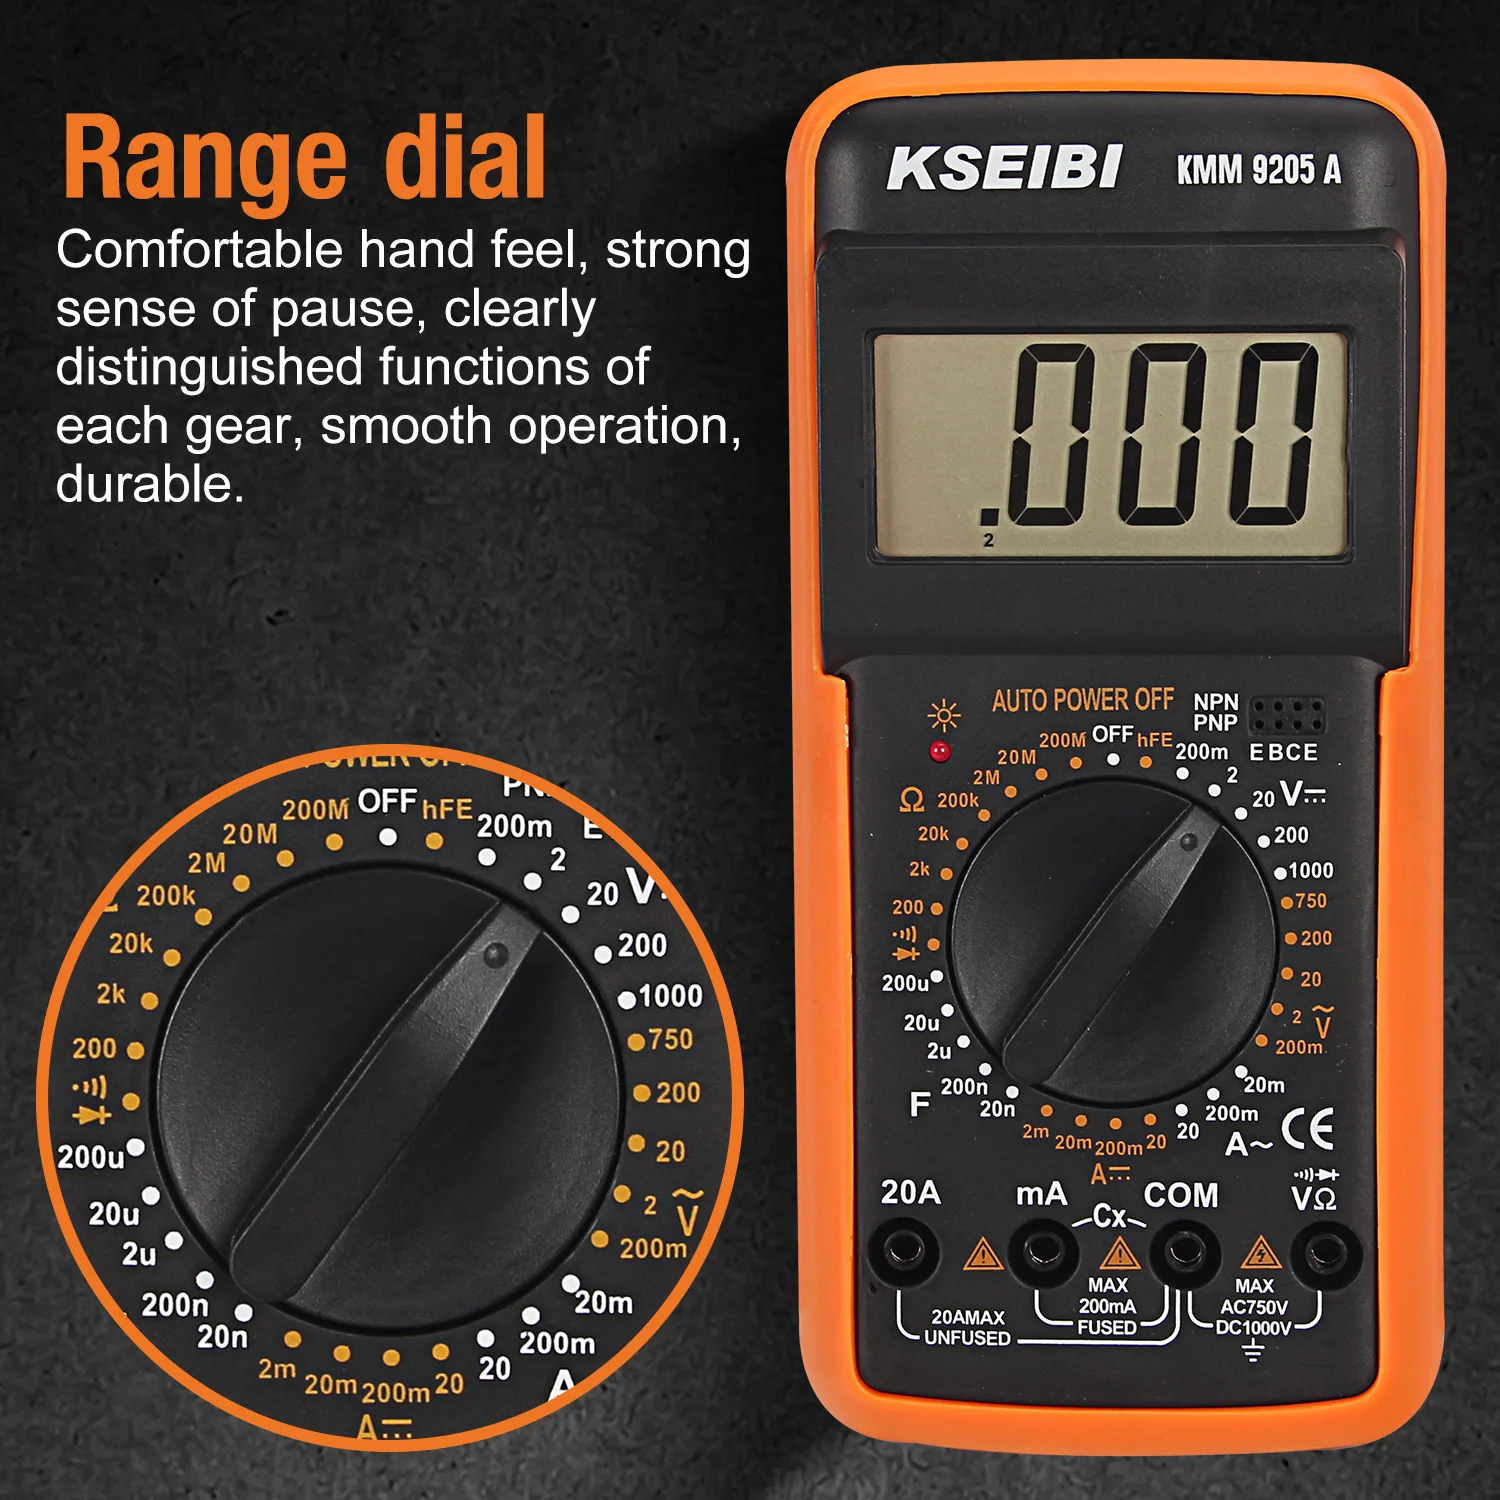 
KSEIBI Professional Voltage Tester LCD Screen With Capacity 12V 